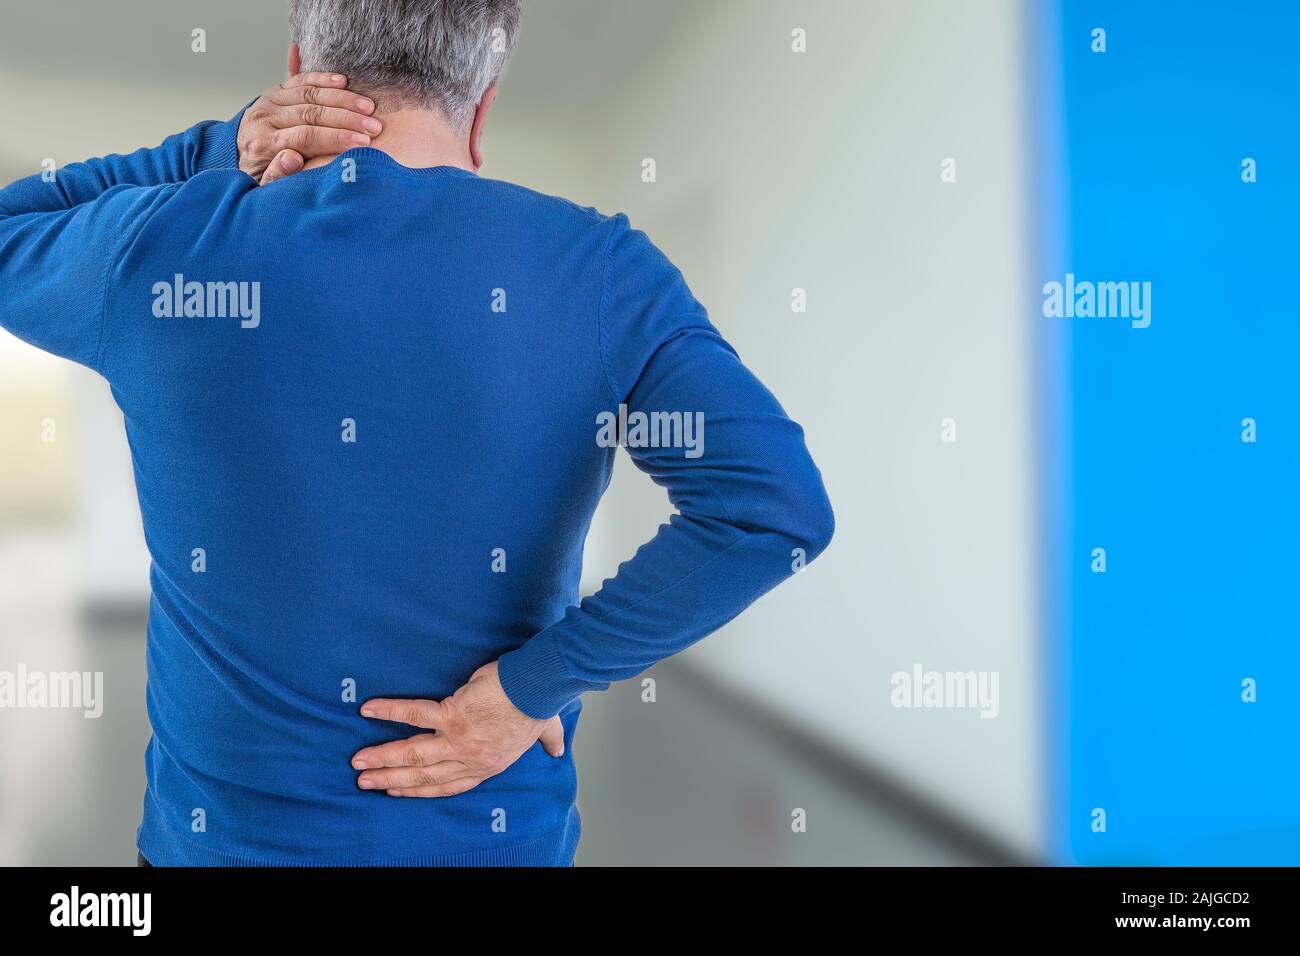 Rear view image of a old man with neck and back injury, on hospital corridor Stock Photo